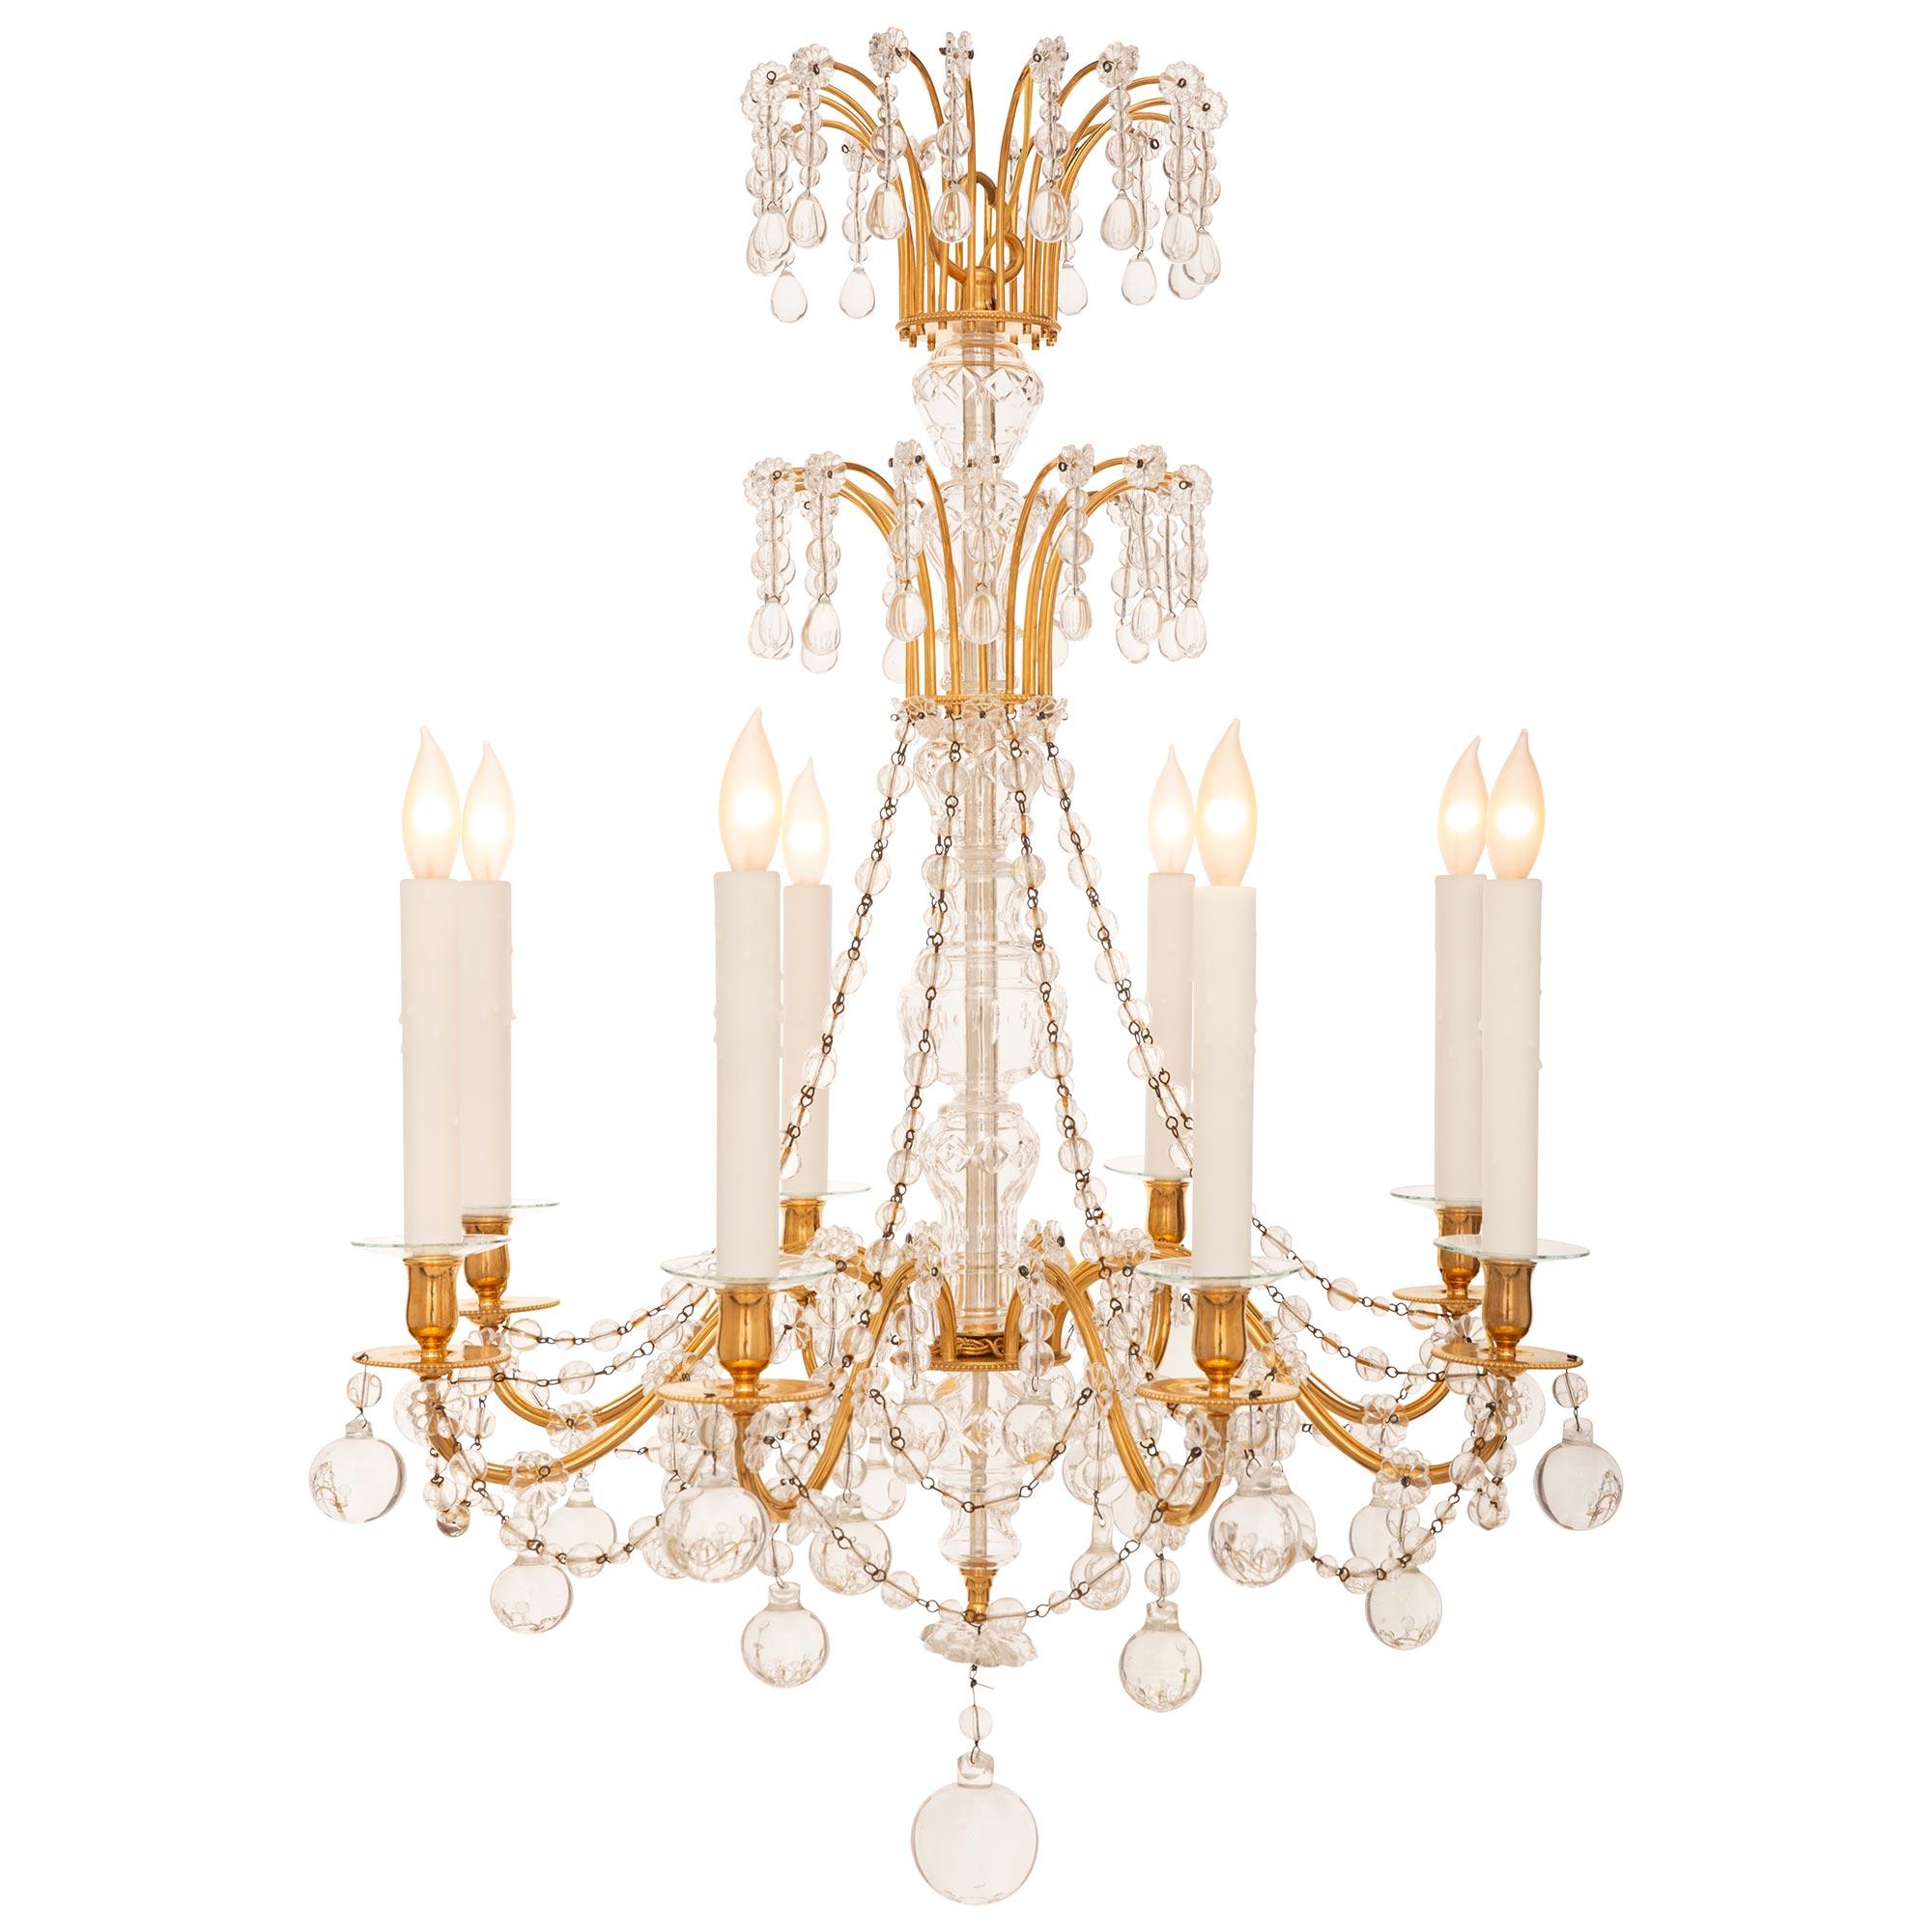 French Turn of the Century Louis XVI st. Ormolu and Crystal chandelier In Good Condition For Sale In West Palm Beach, FL